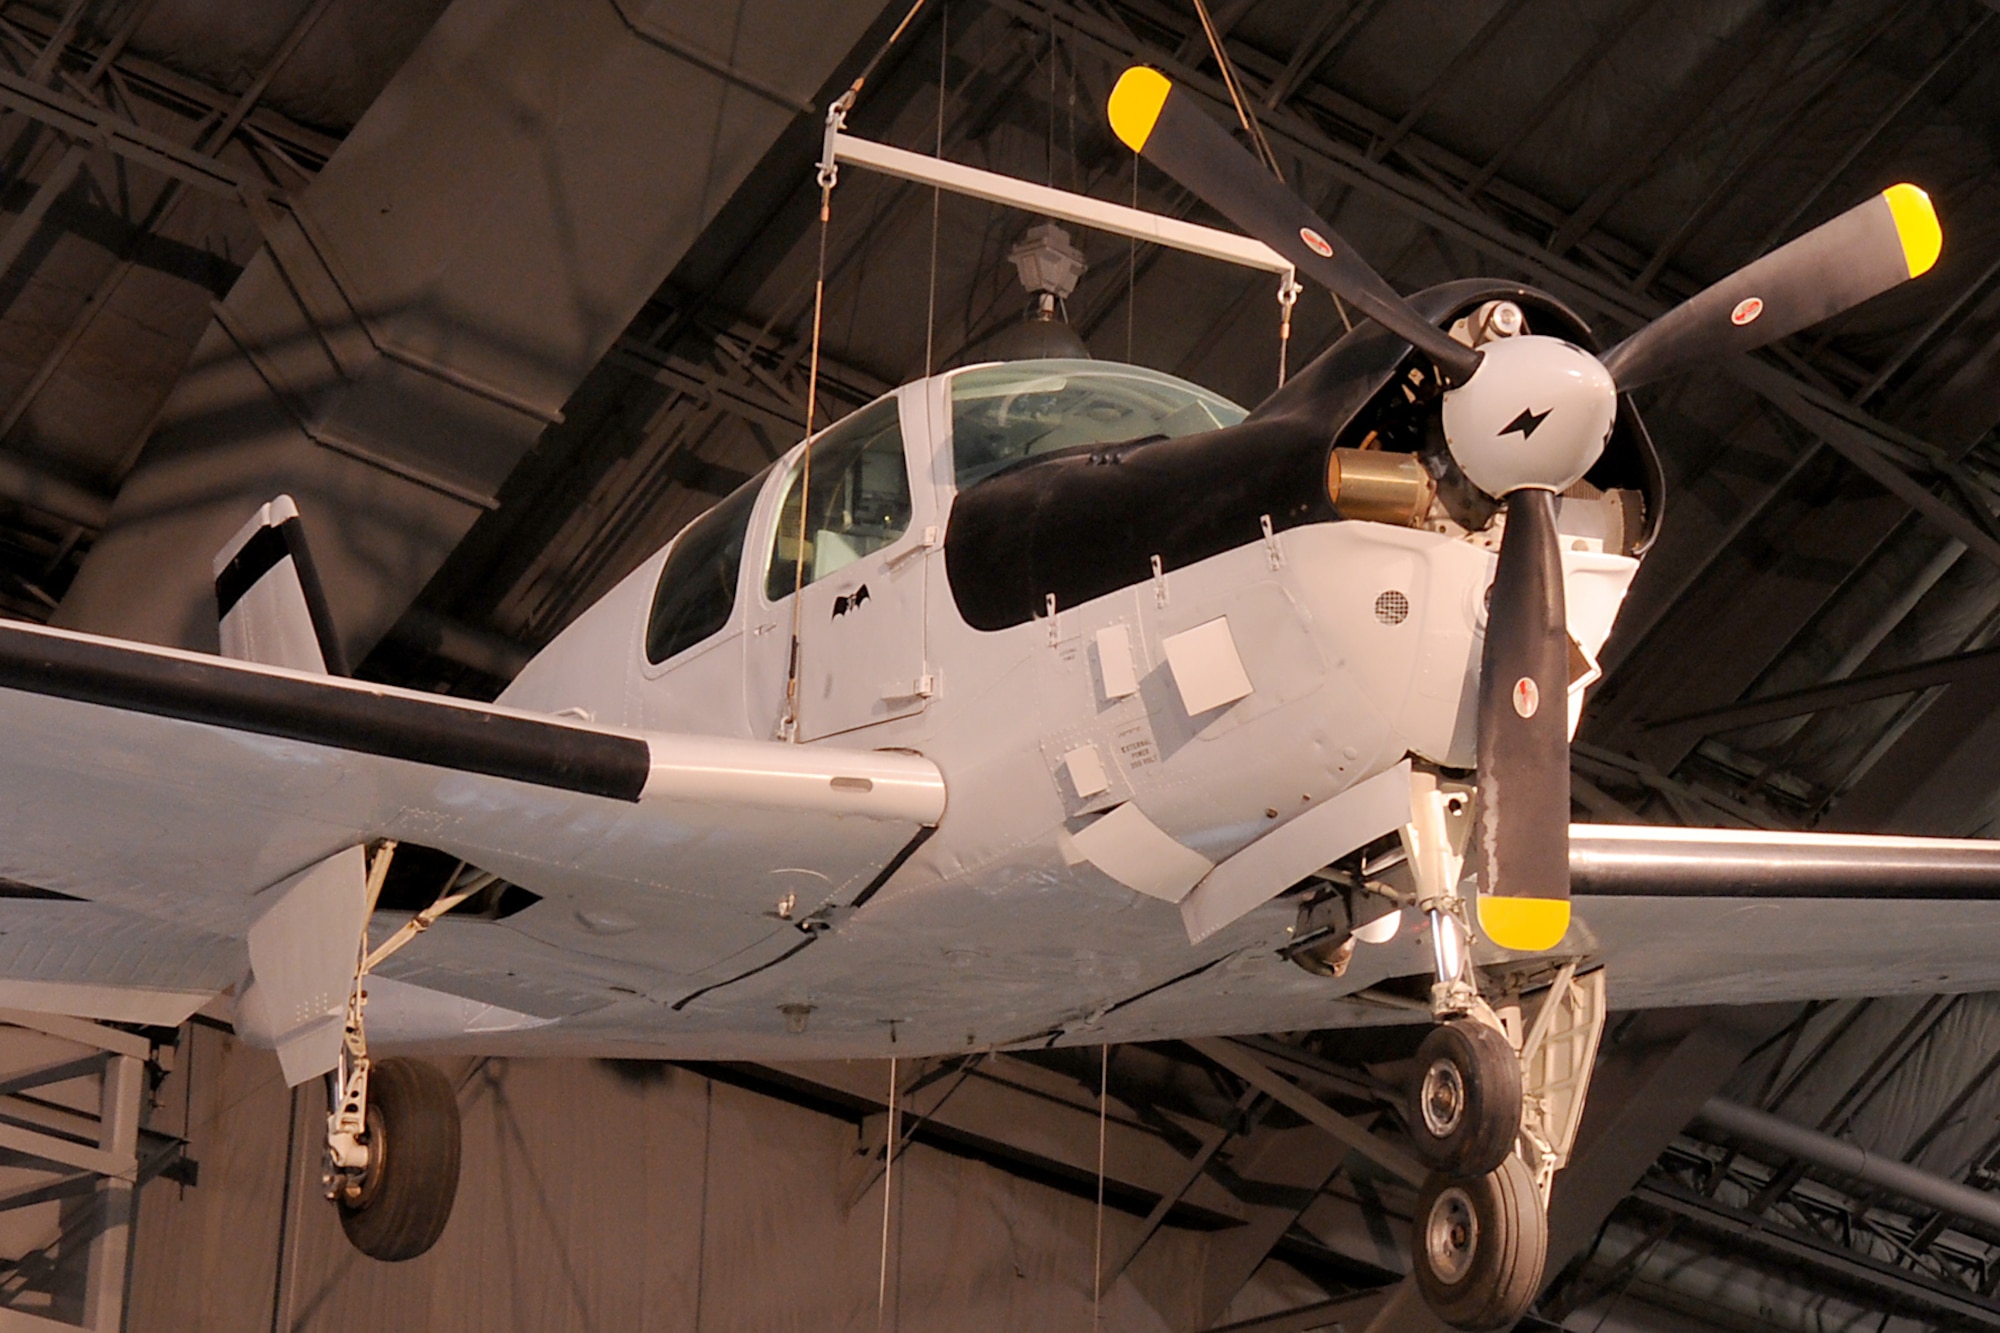 DAYTON, Ohio -- Beech QU-22B in the Southeast Asia War Gallery at the National Museum of the United States Air Force. (U.S. Air Force photo) 
